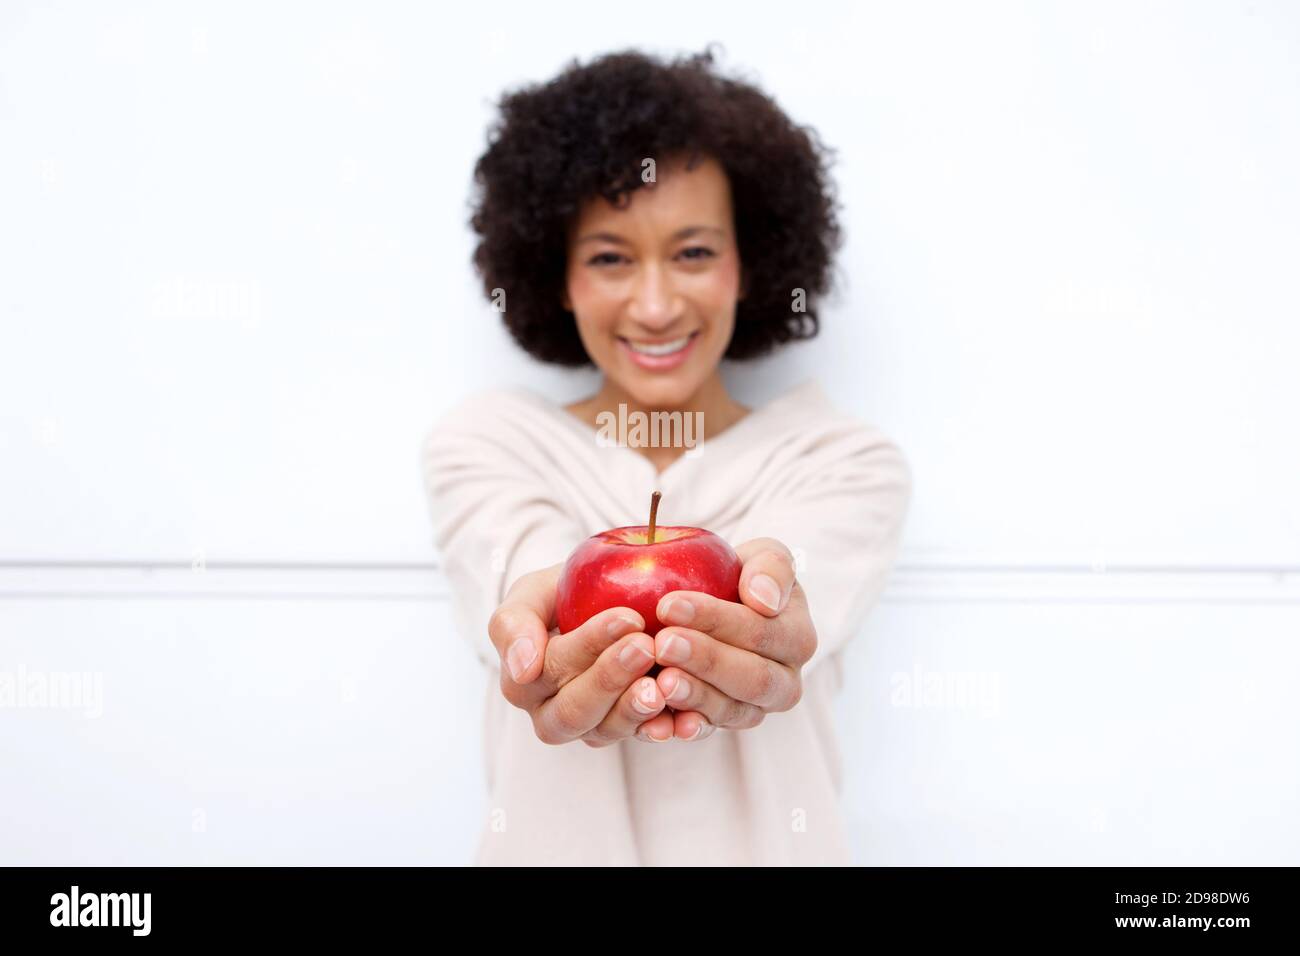 Portrait of happy healthy woman holding red apple in hands Stock Photo